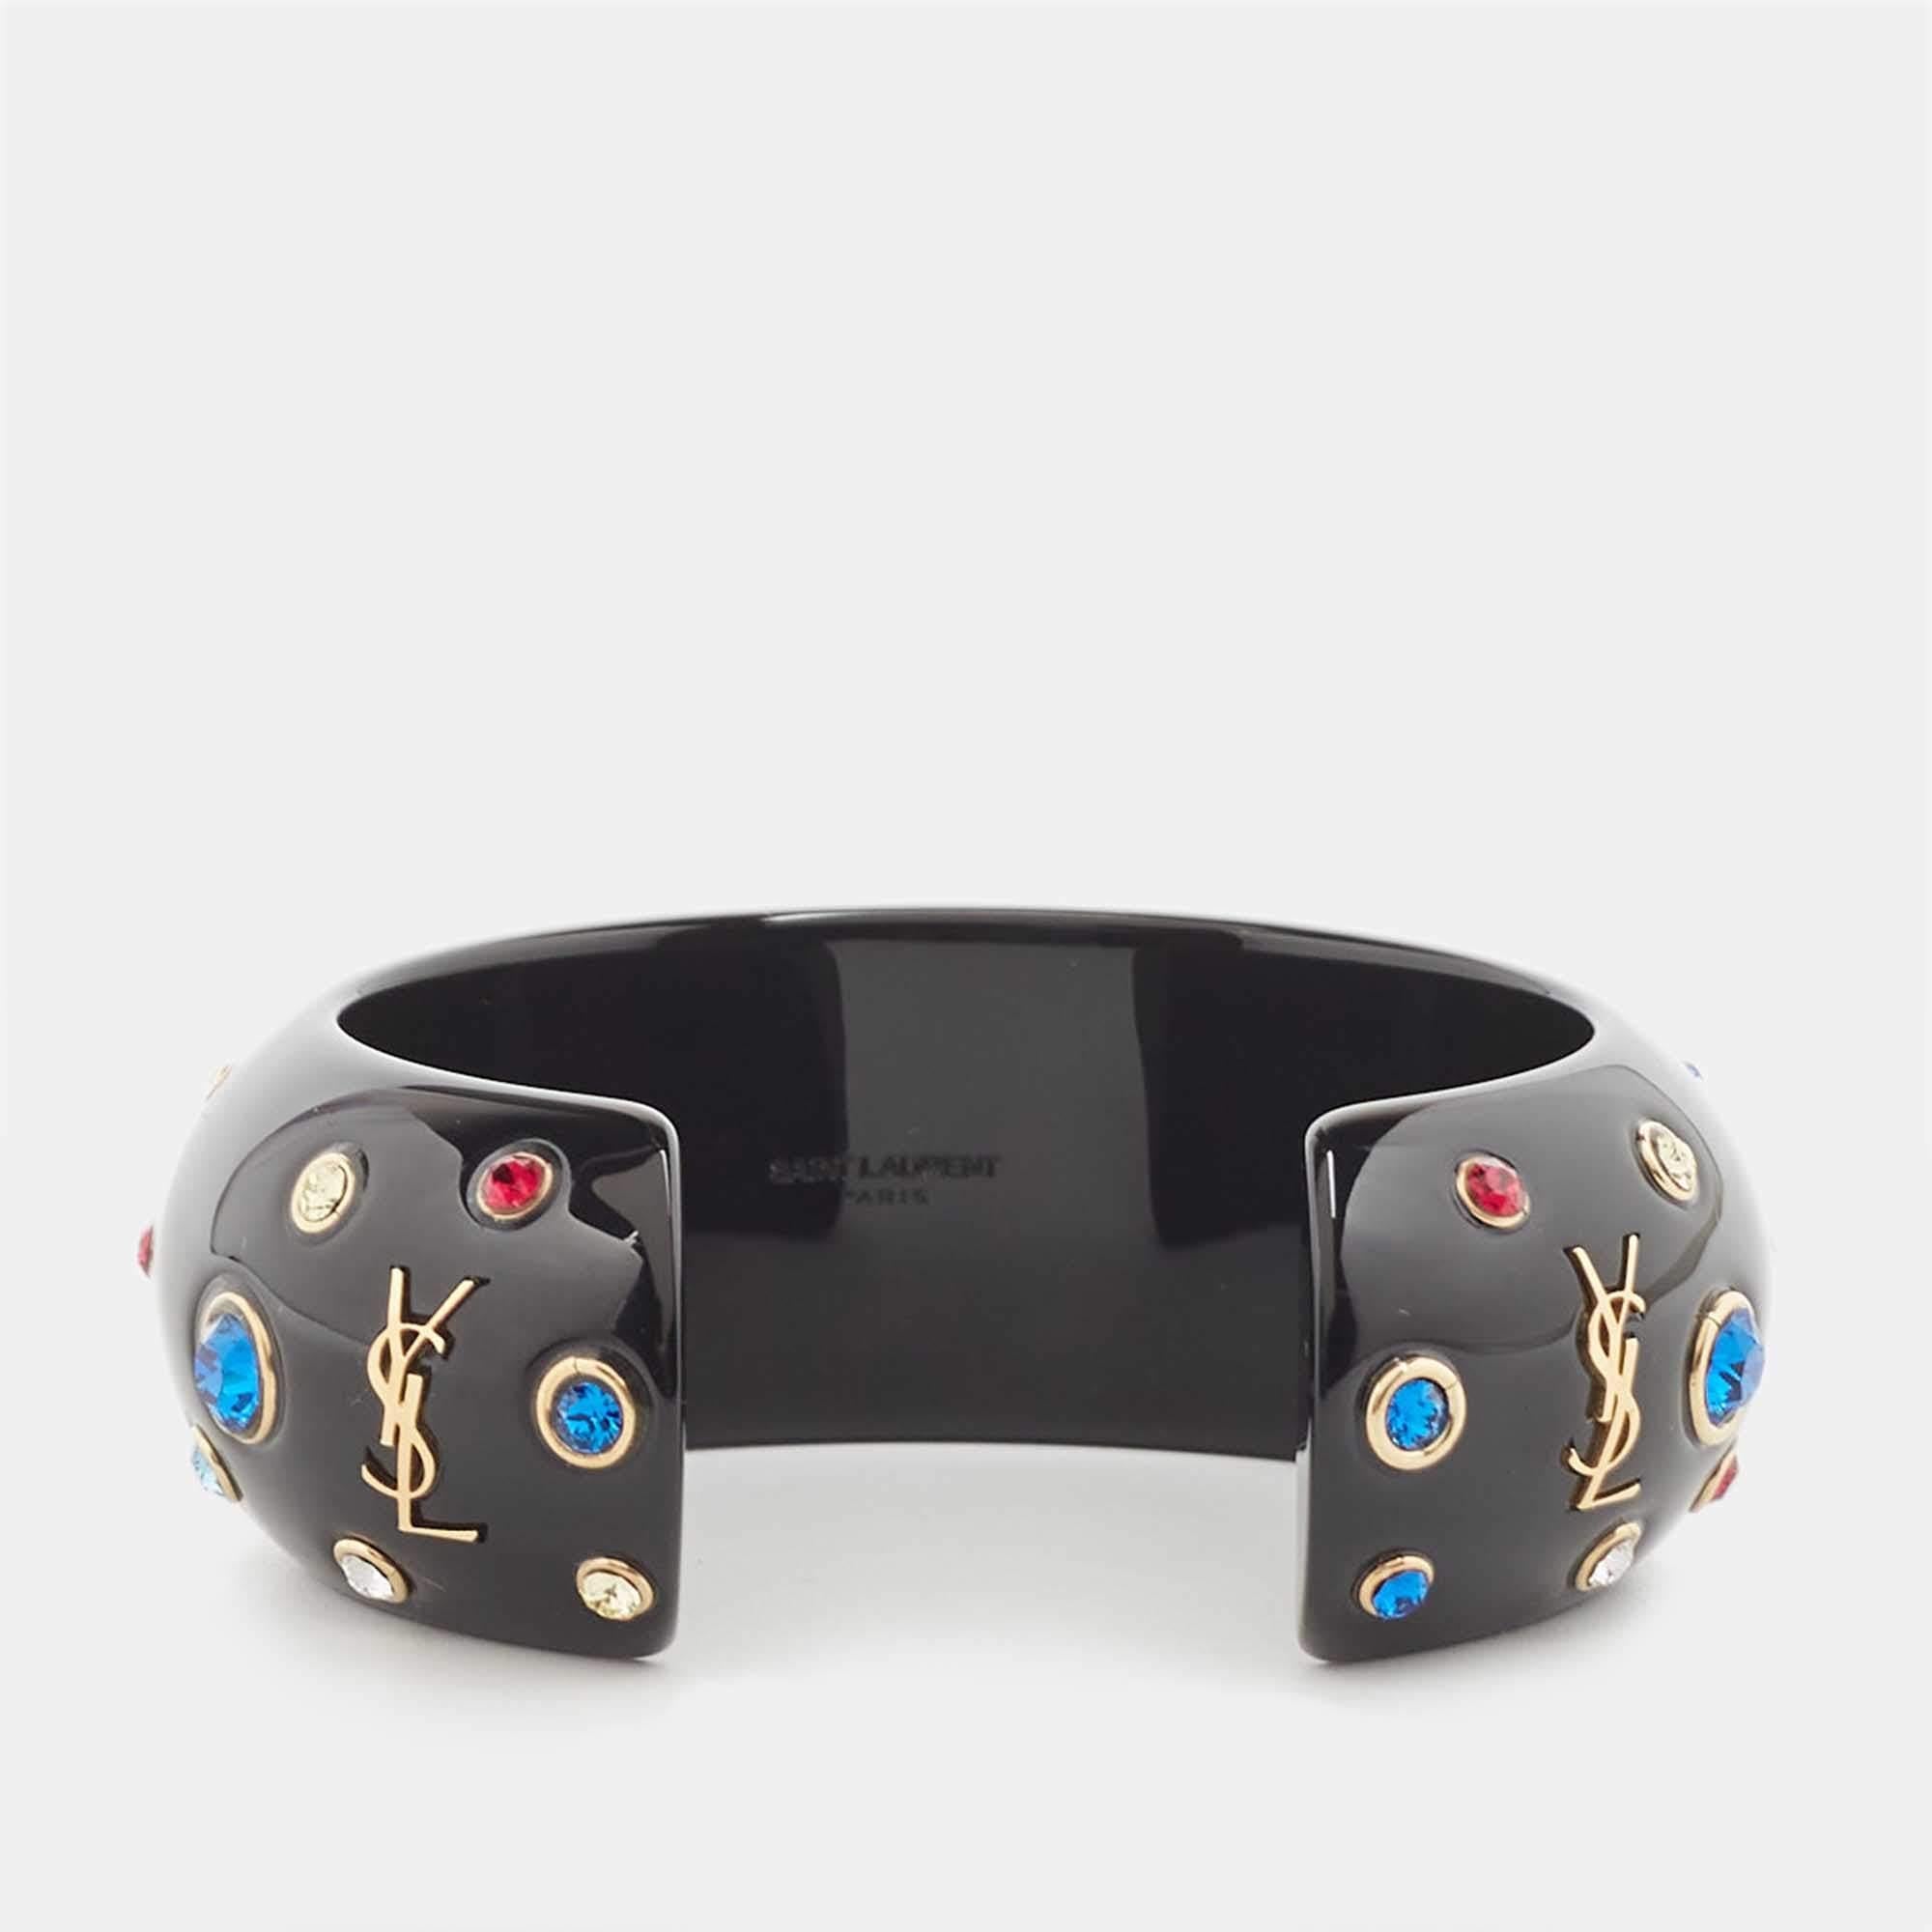 Show your love for sparkles and luxury accessories with this stunning bracelet from Saint Laurent . It is beautifully detailed with crystals and spikes all laid in an artistic manner so as to exude a modern appeal.

